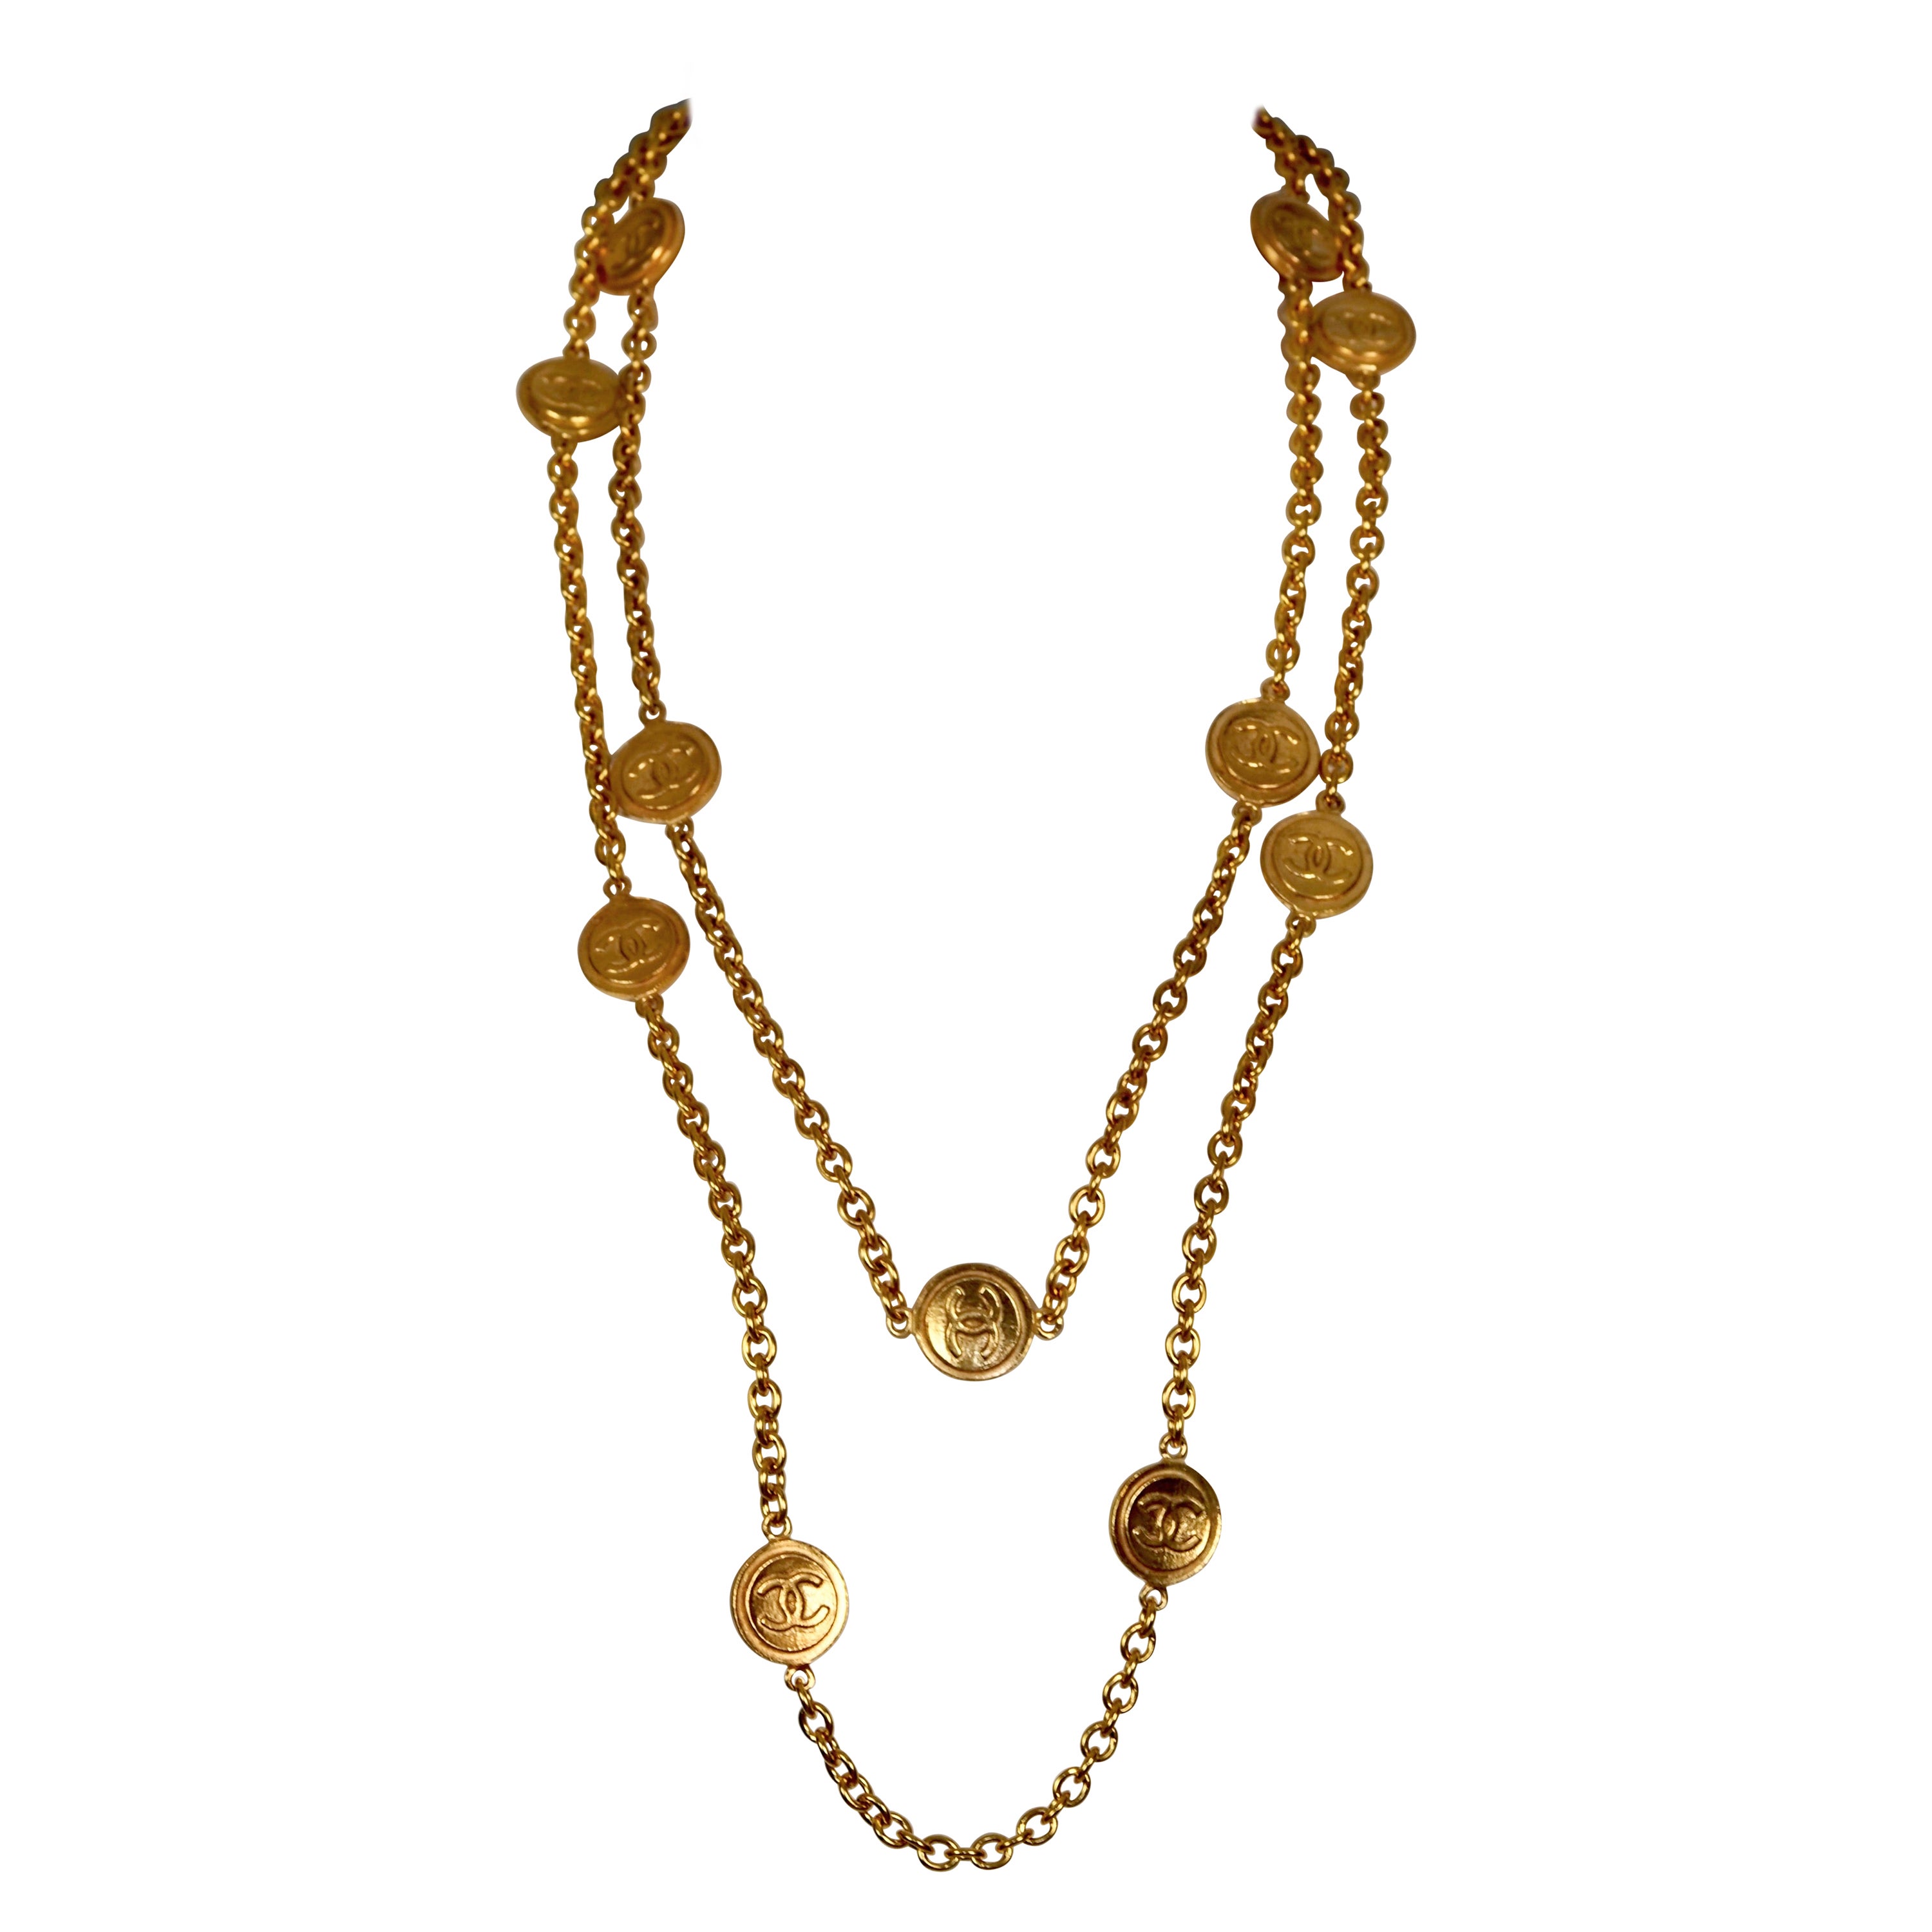 Layered Pearl Camellia Long Necklace